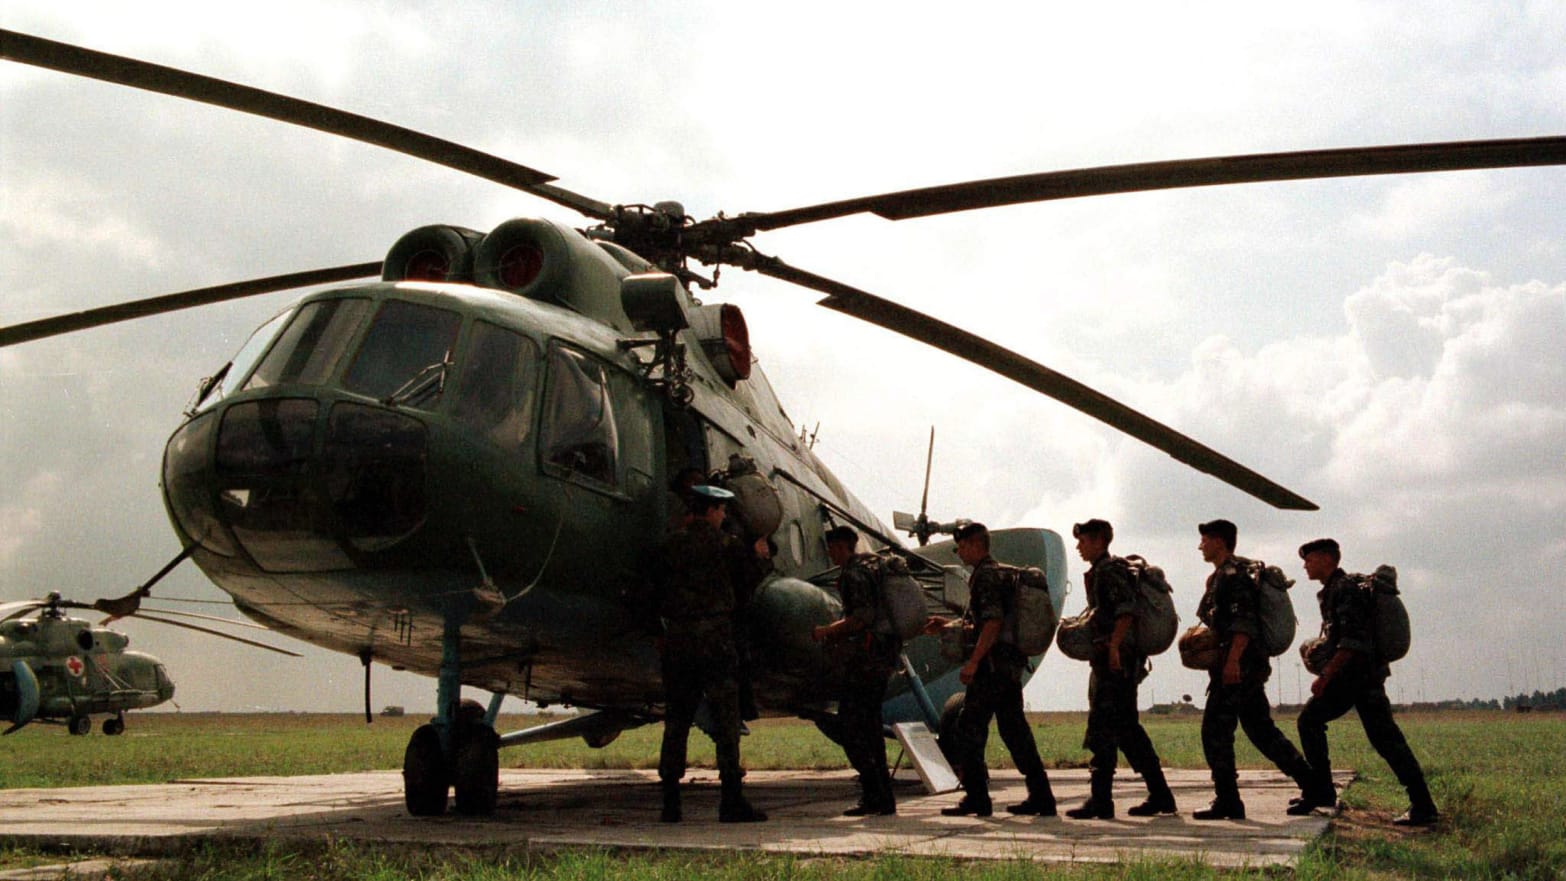 An Mi-8 helicopter is shown in this undated file photograph